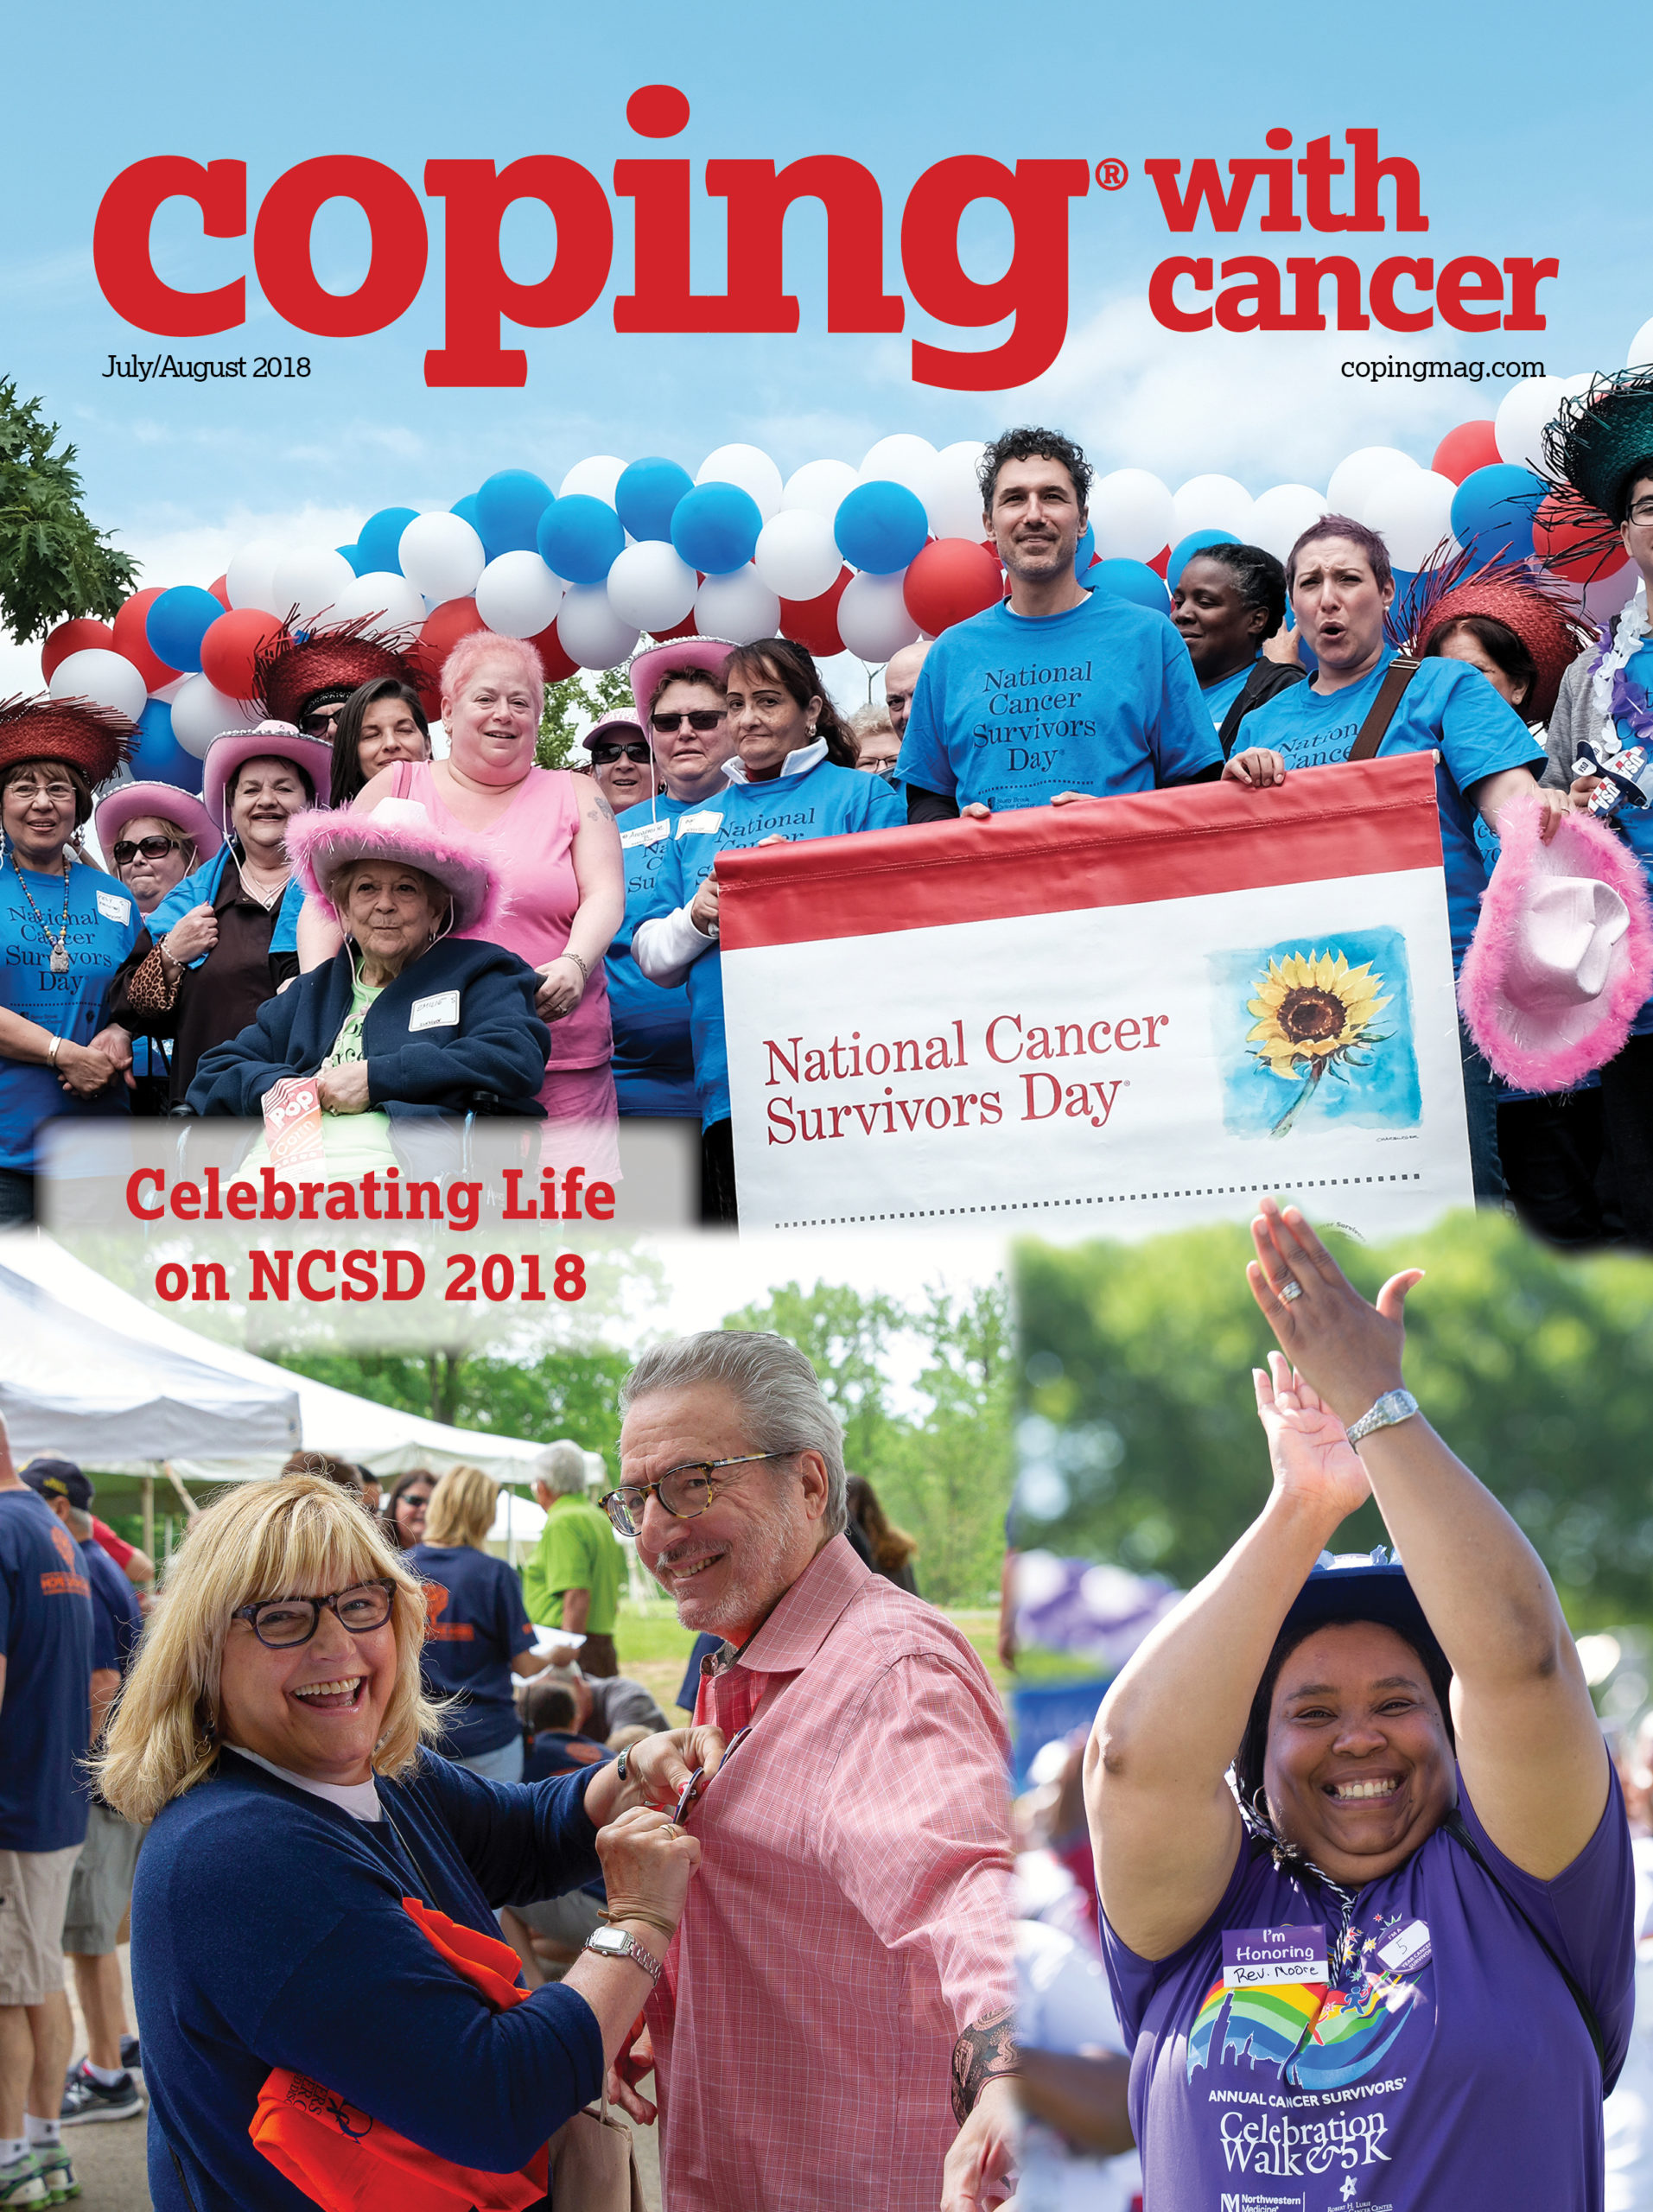 Latest Issue of Coping with Cancer Magazine Features Exclusive Coverage of National Cancer Survivors Day 2018